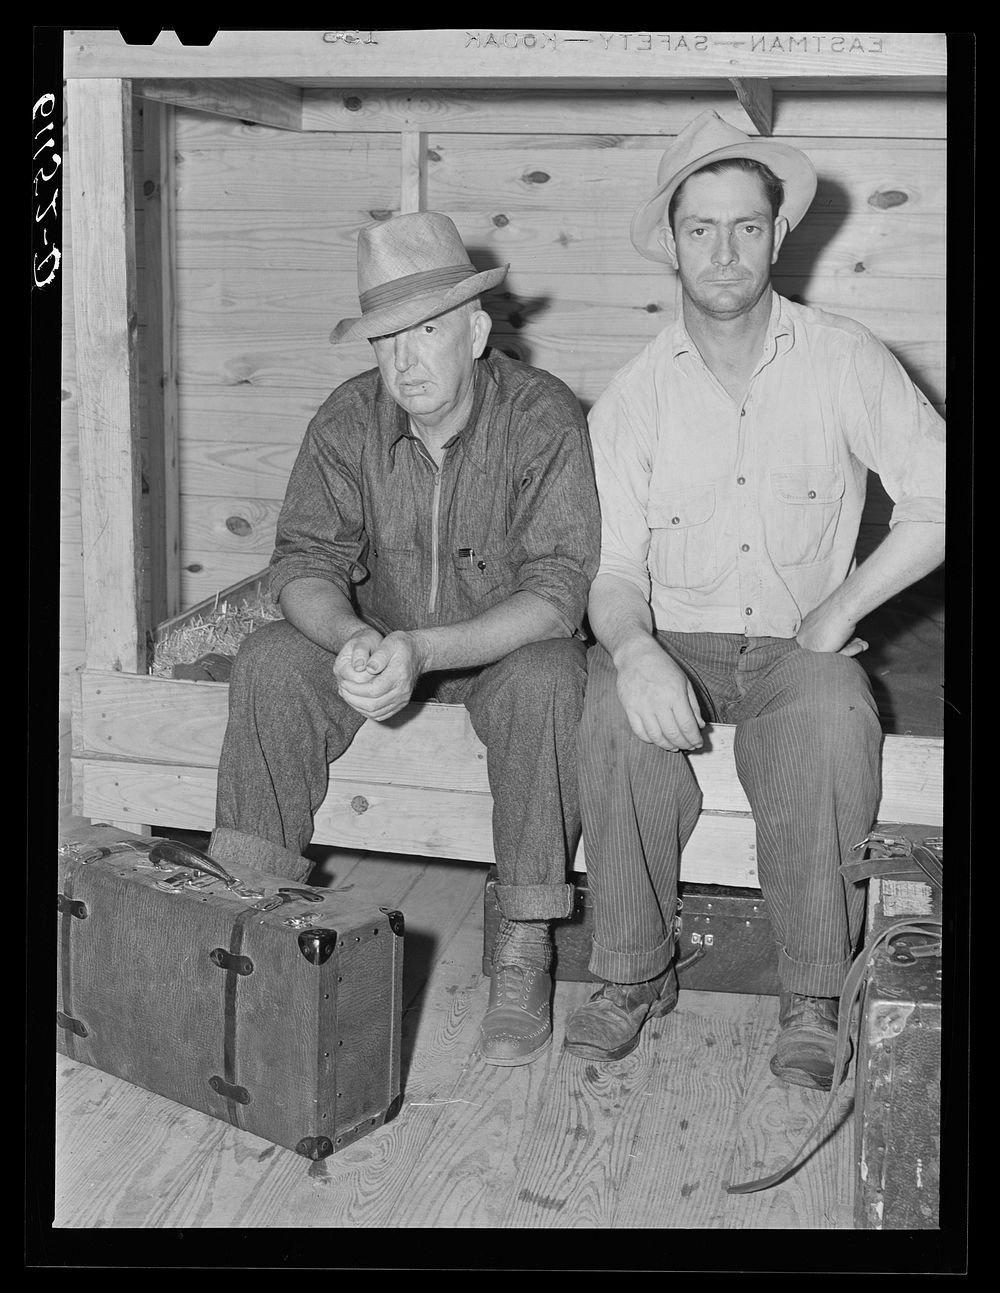 Migrant fruit workers. Berrien County, Michigan. Sourced from the Library of Congress.